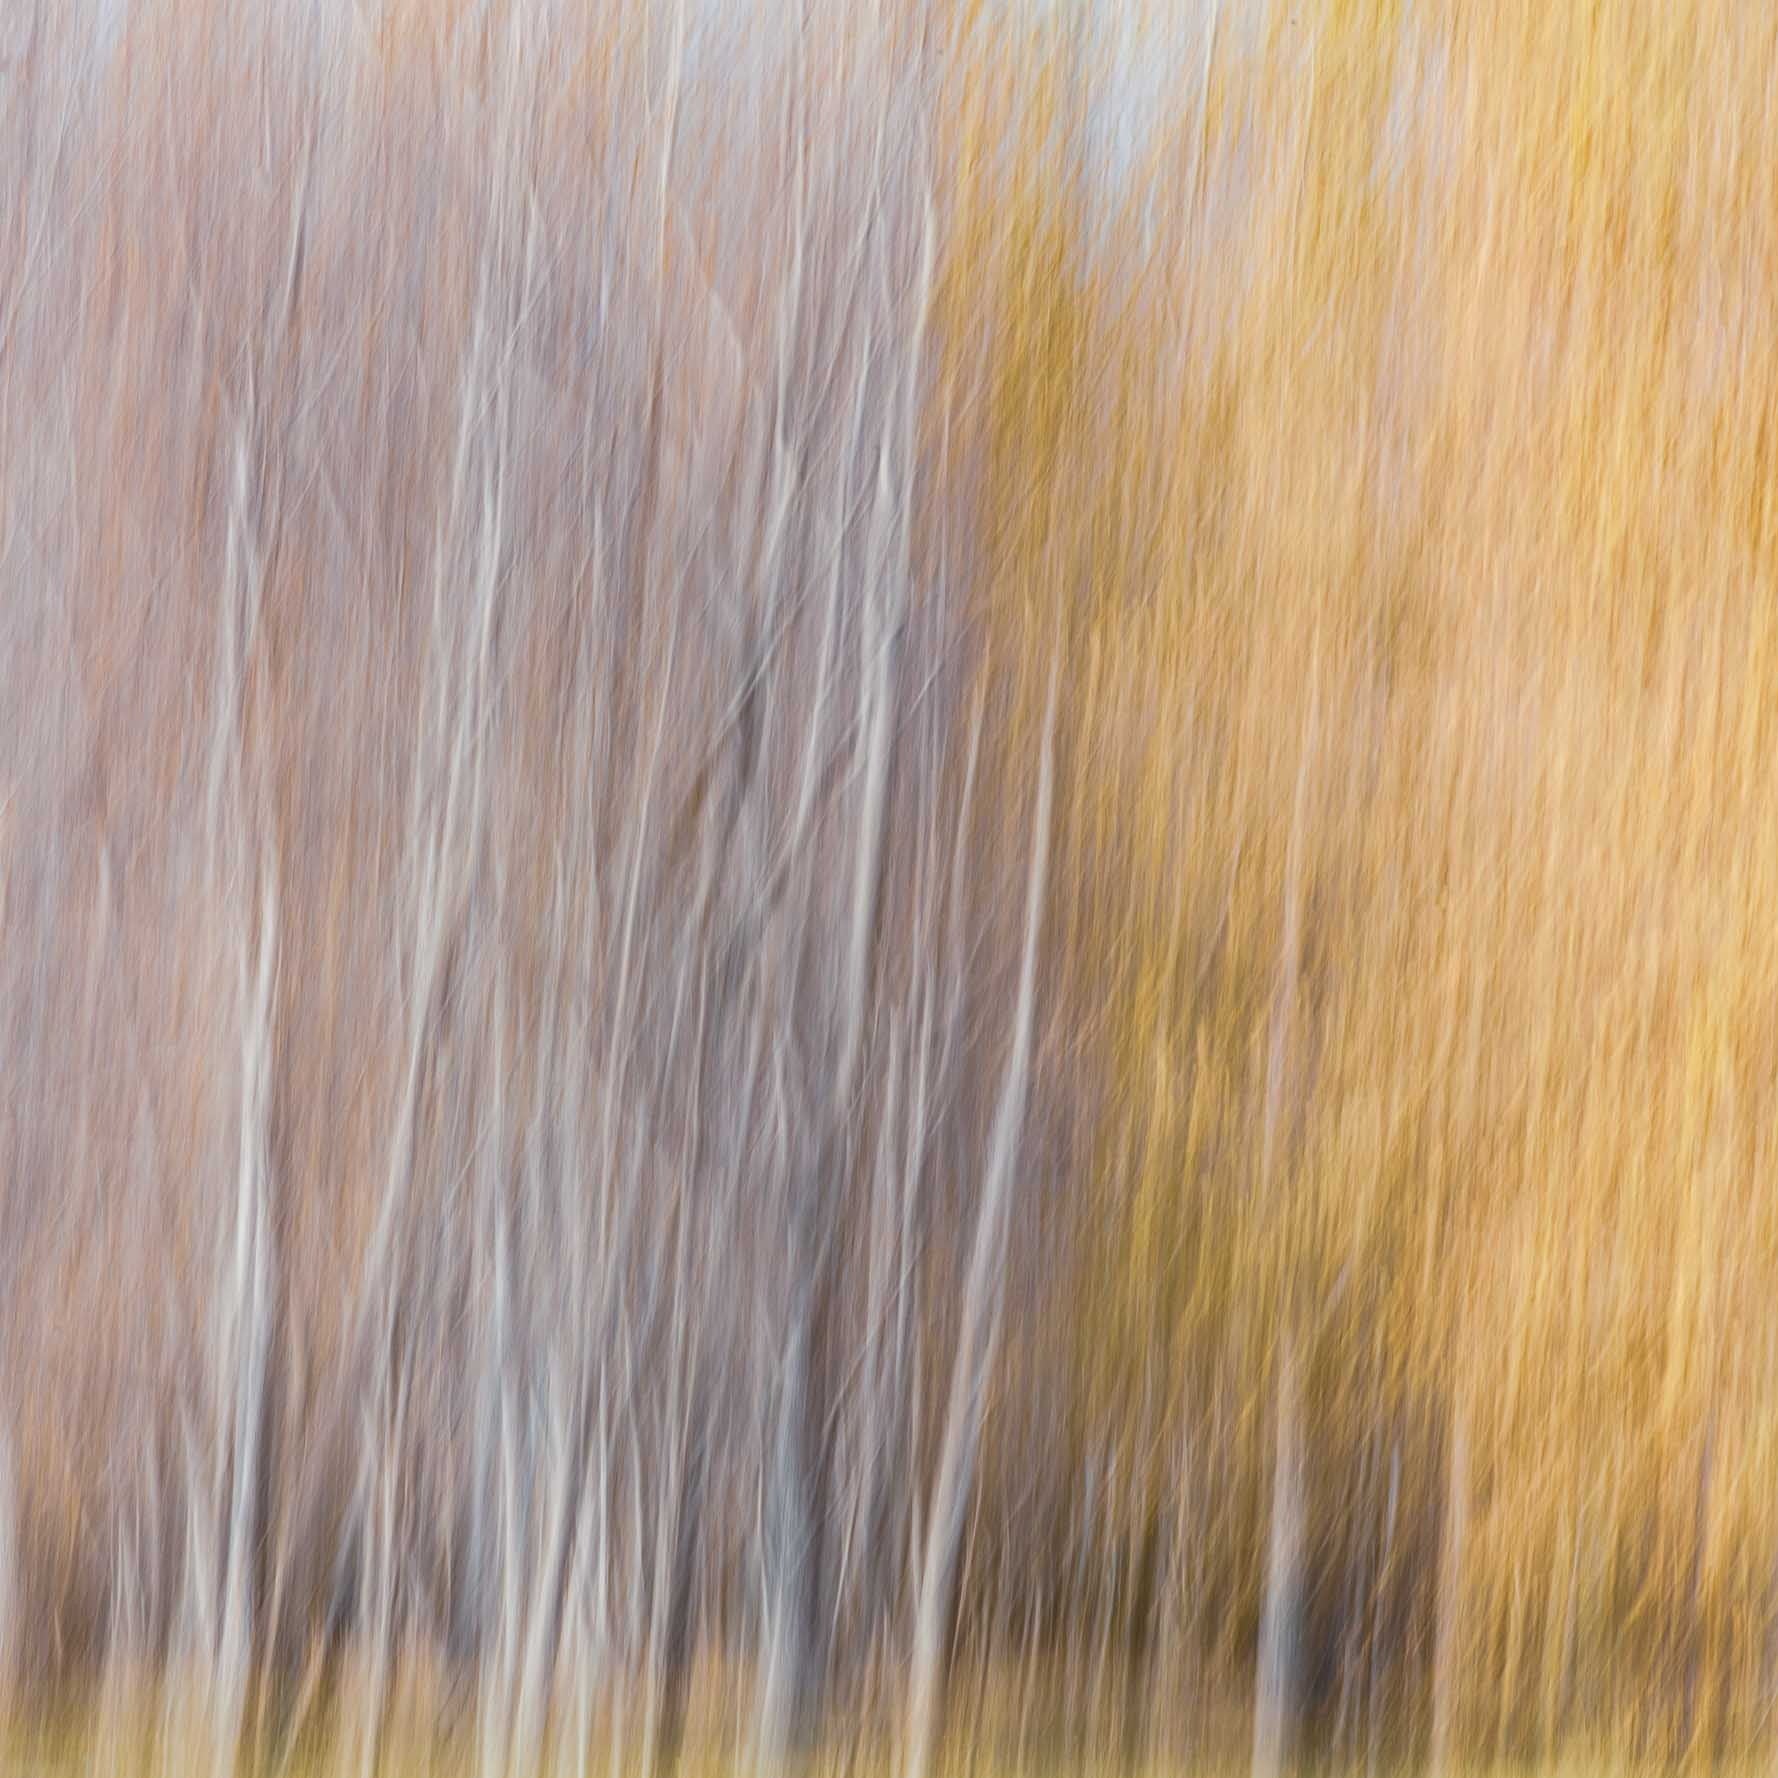 Abstract, blurred image of autumn trees in Queenstown, resembling an impressionistic painting with soft white and golden strokes.